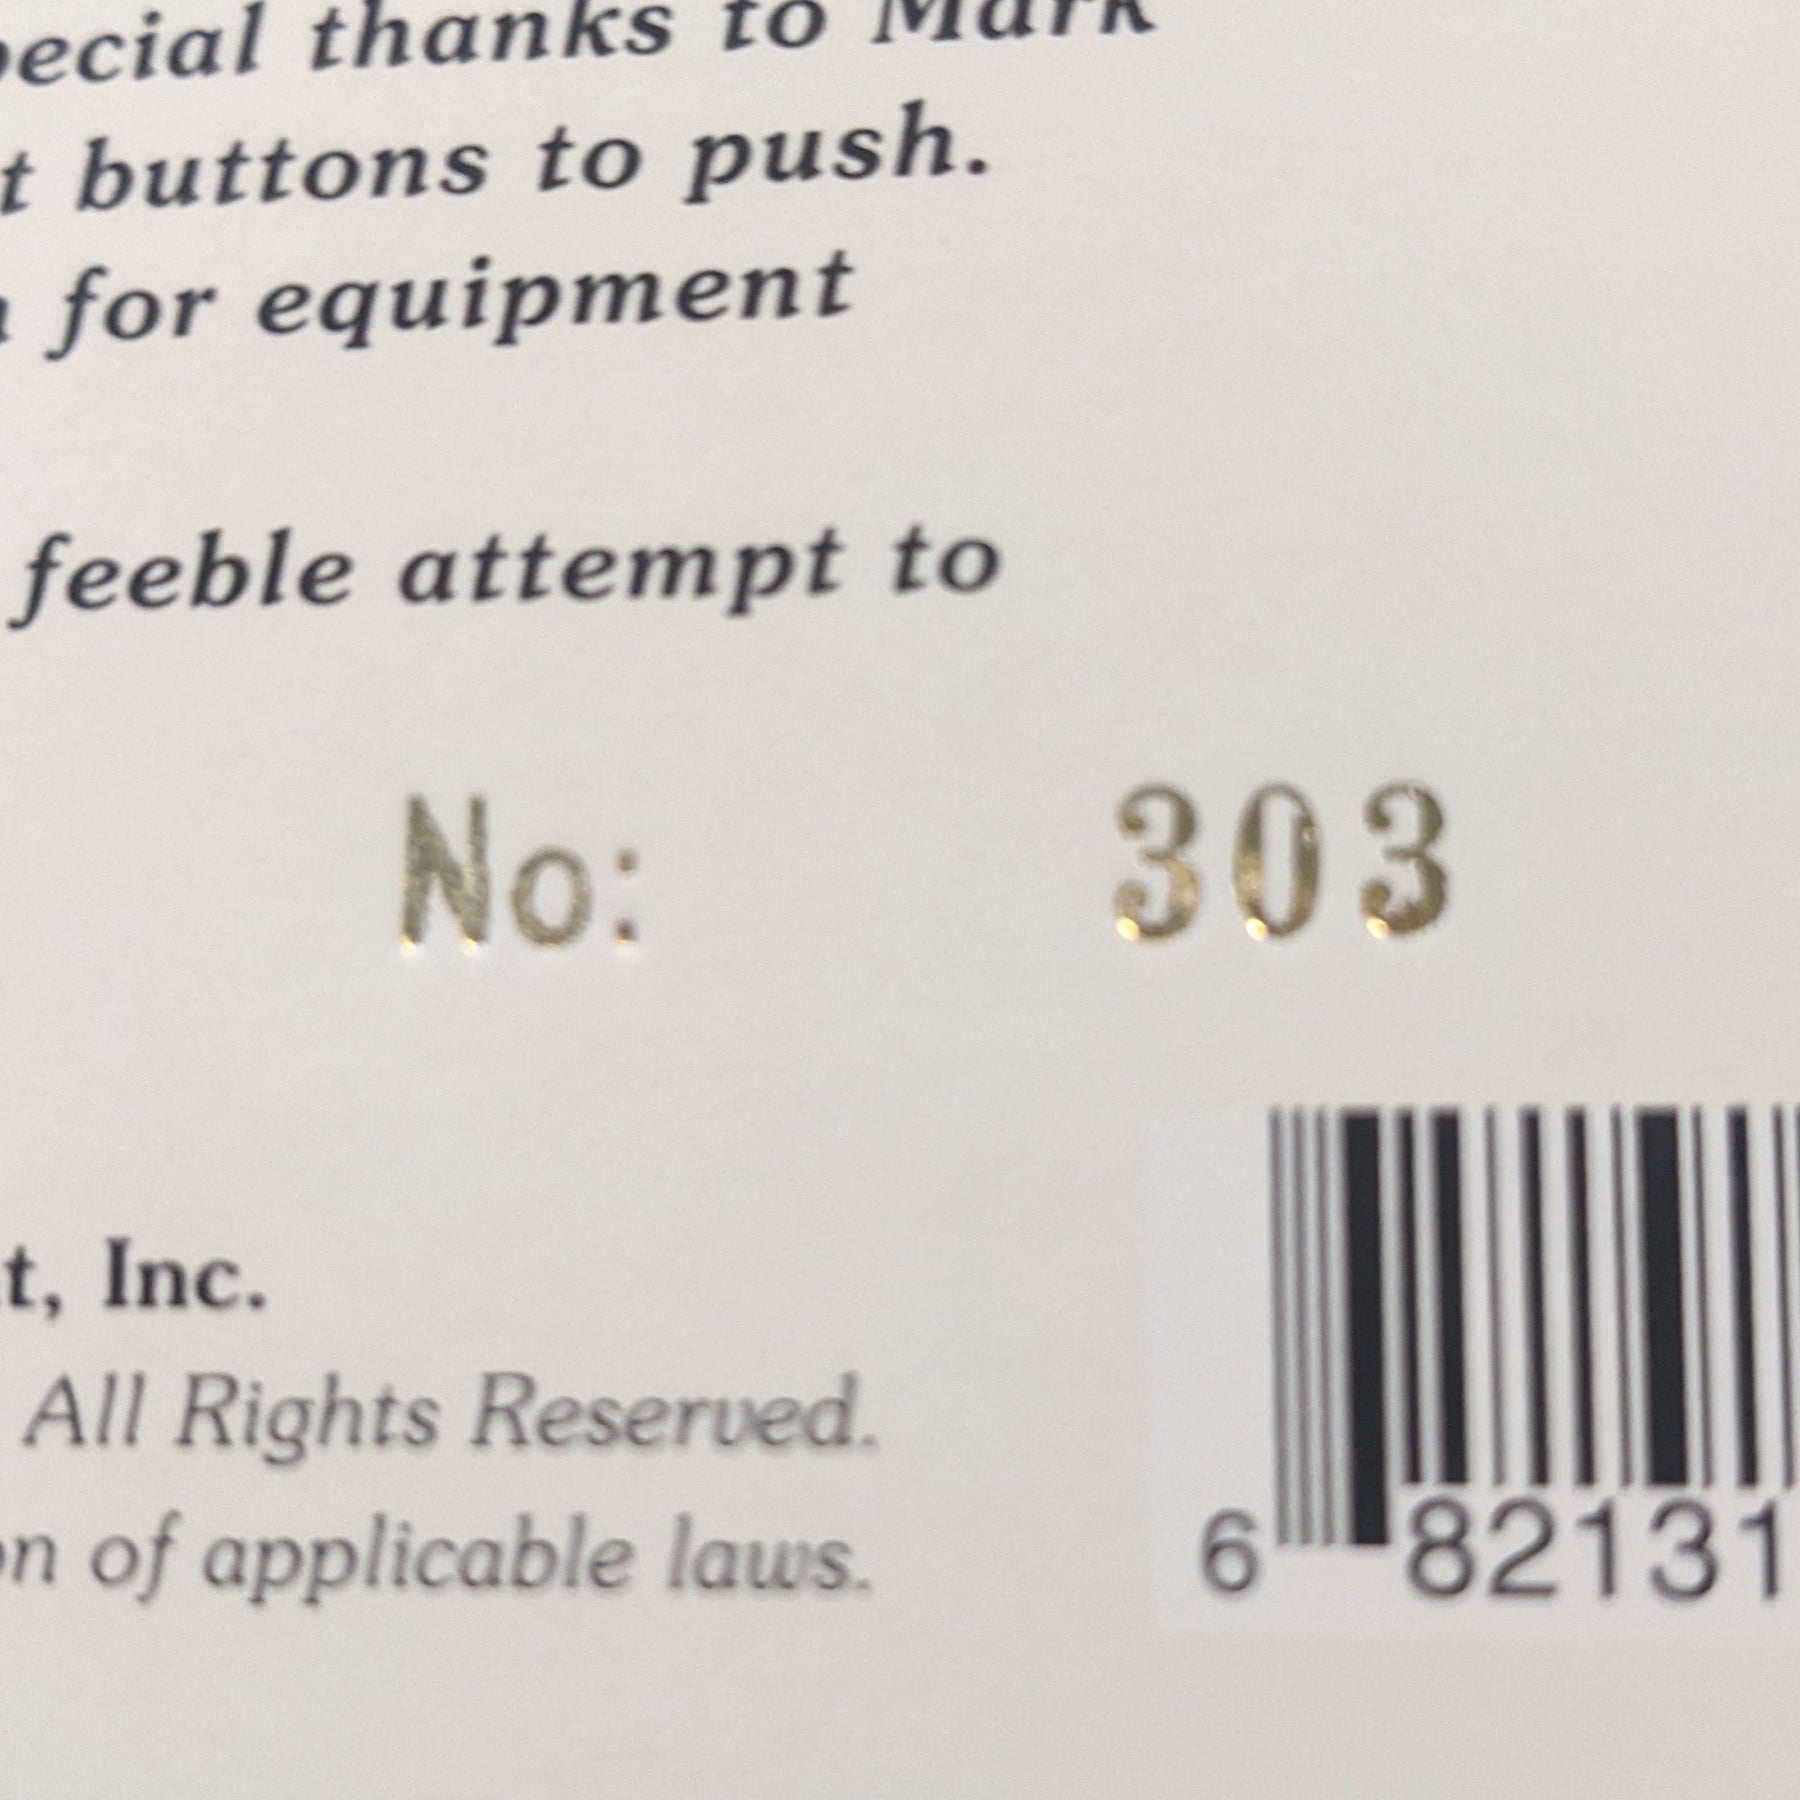 up close image of the back of the vinyl sleeve with the bar code showing and the number that the vinyl is. this is white with black text.